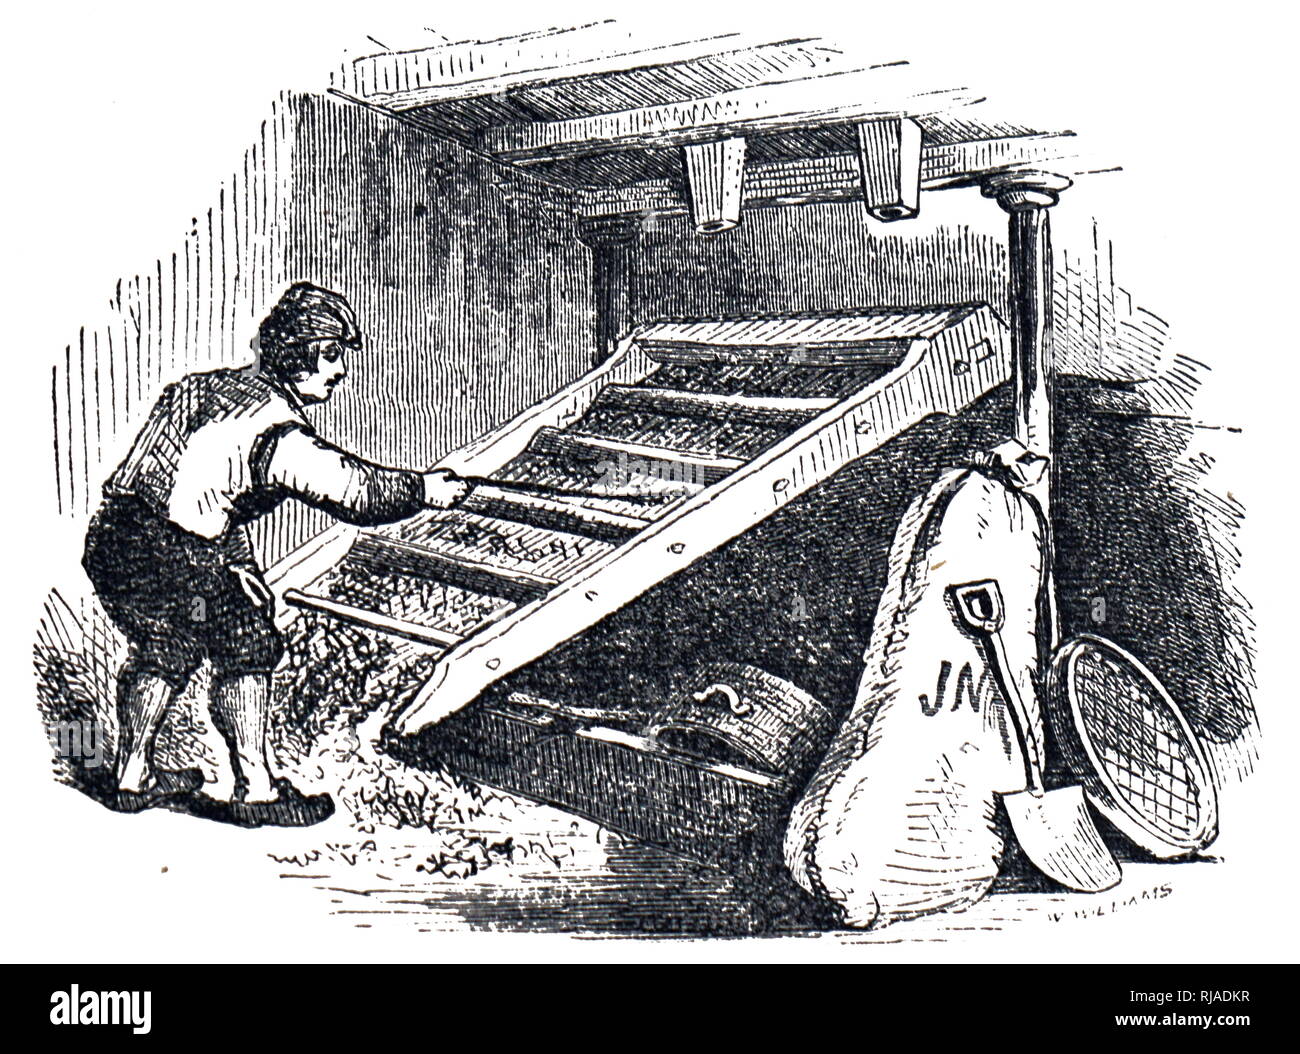 An engraving depicting the process of turning barley into malt: removing rootlets from grain by screening after the kilning stage. Dated 19th century Stock Photo